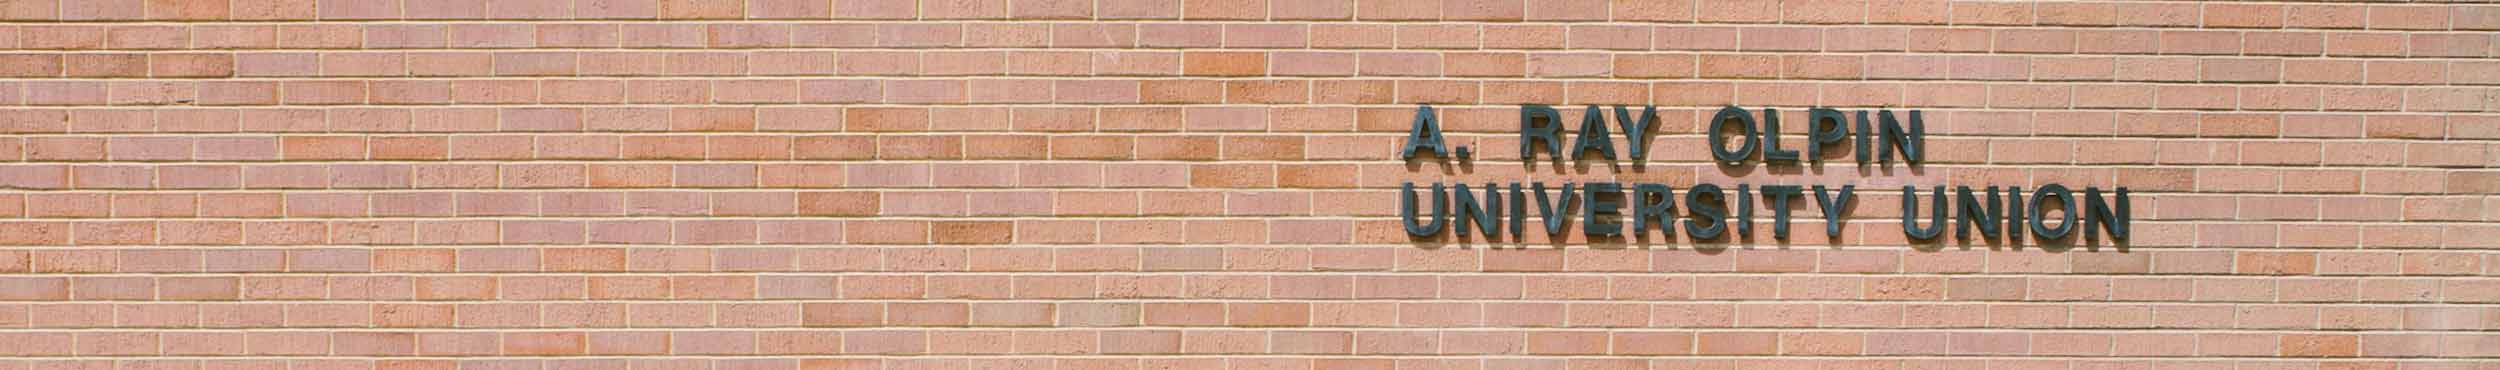 A photo of a brick wall with metal words "A. Ray Olpin University Union" mounted into the brick.